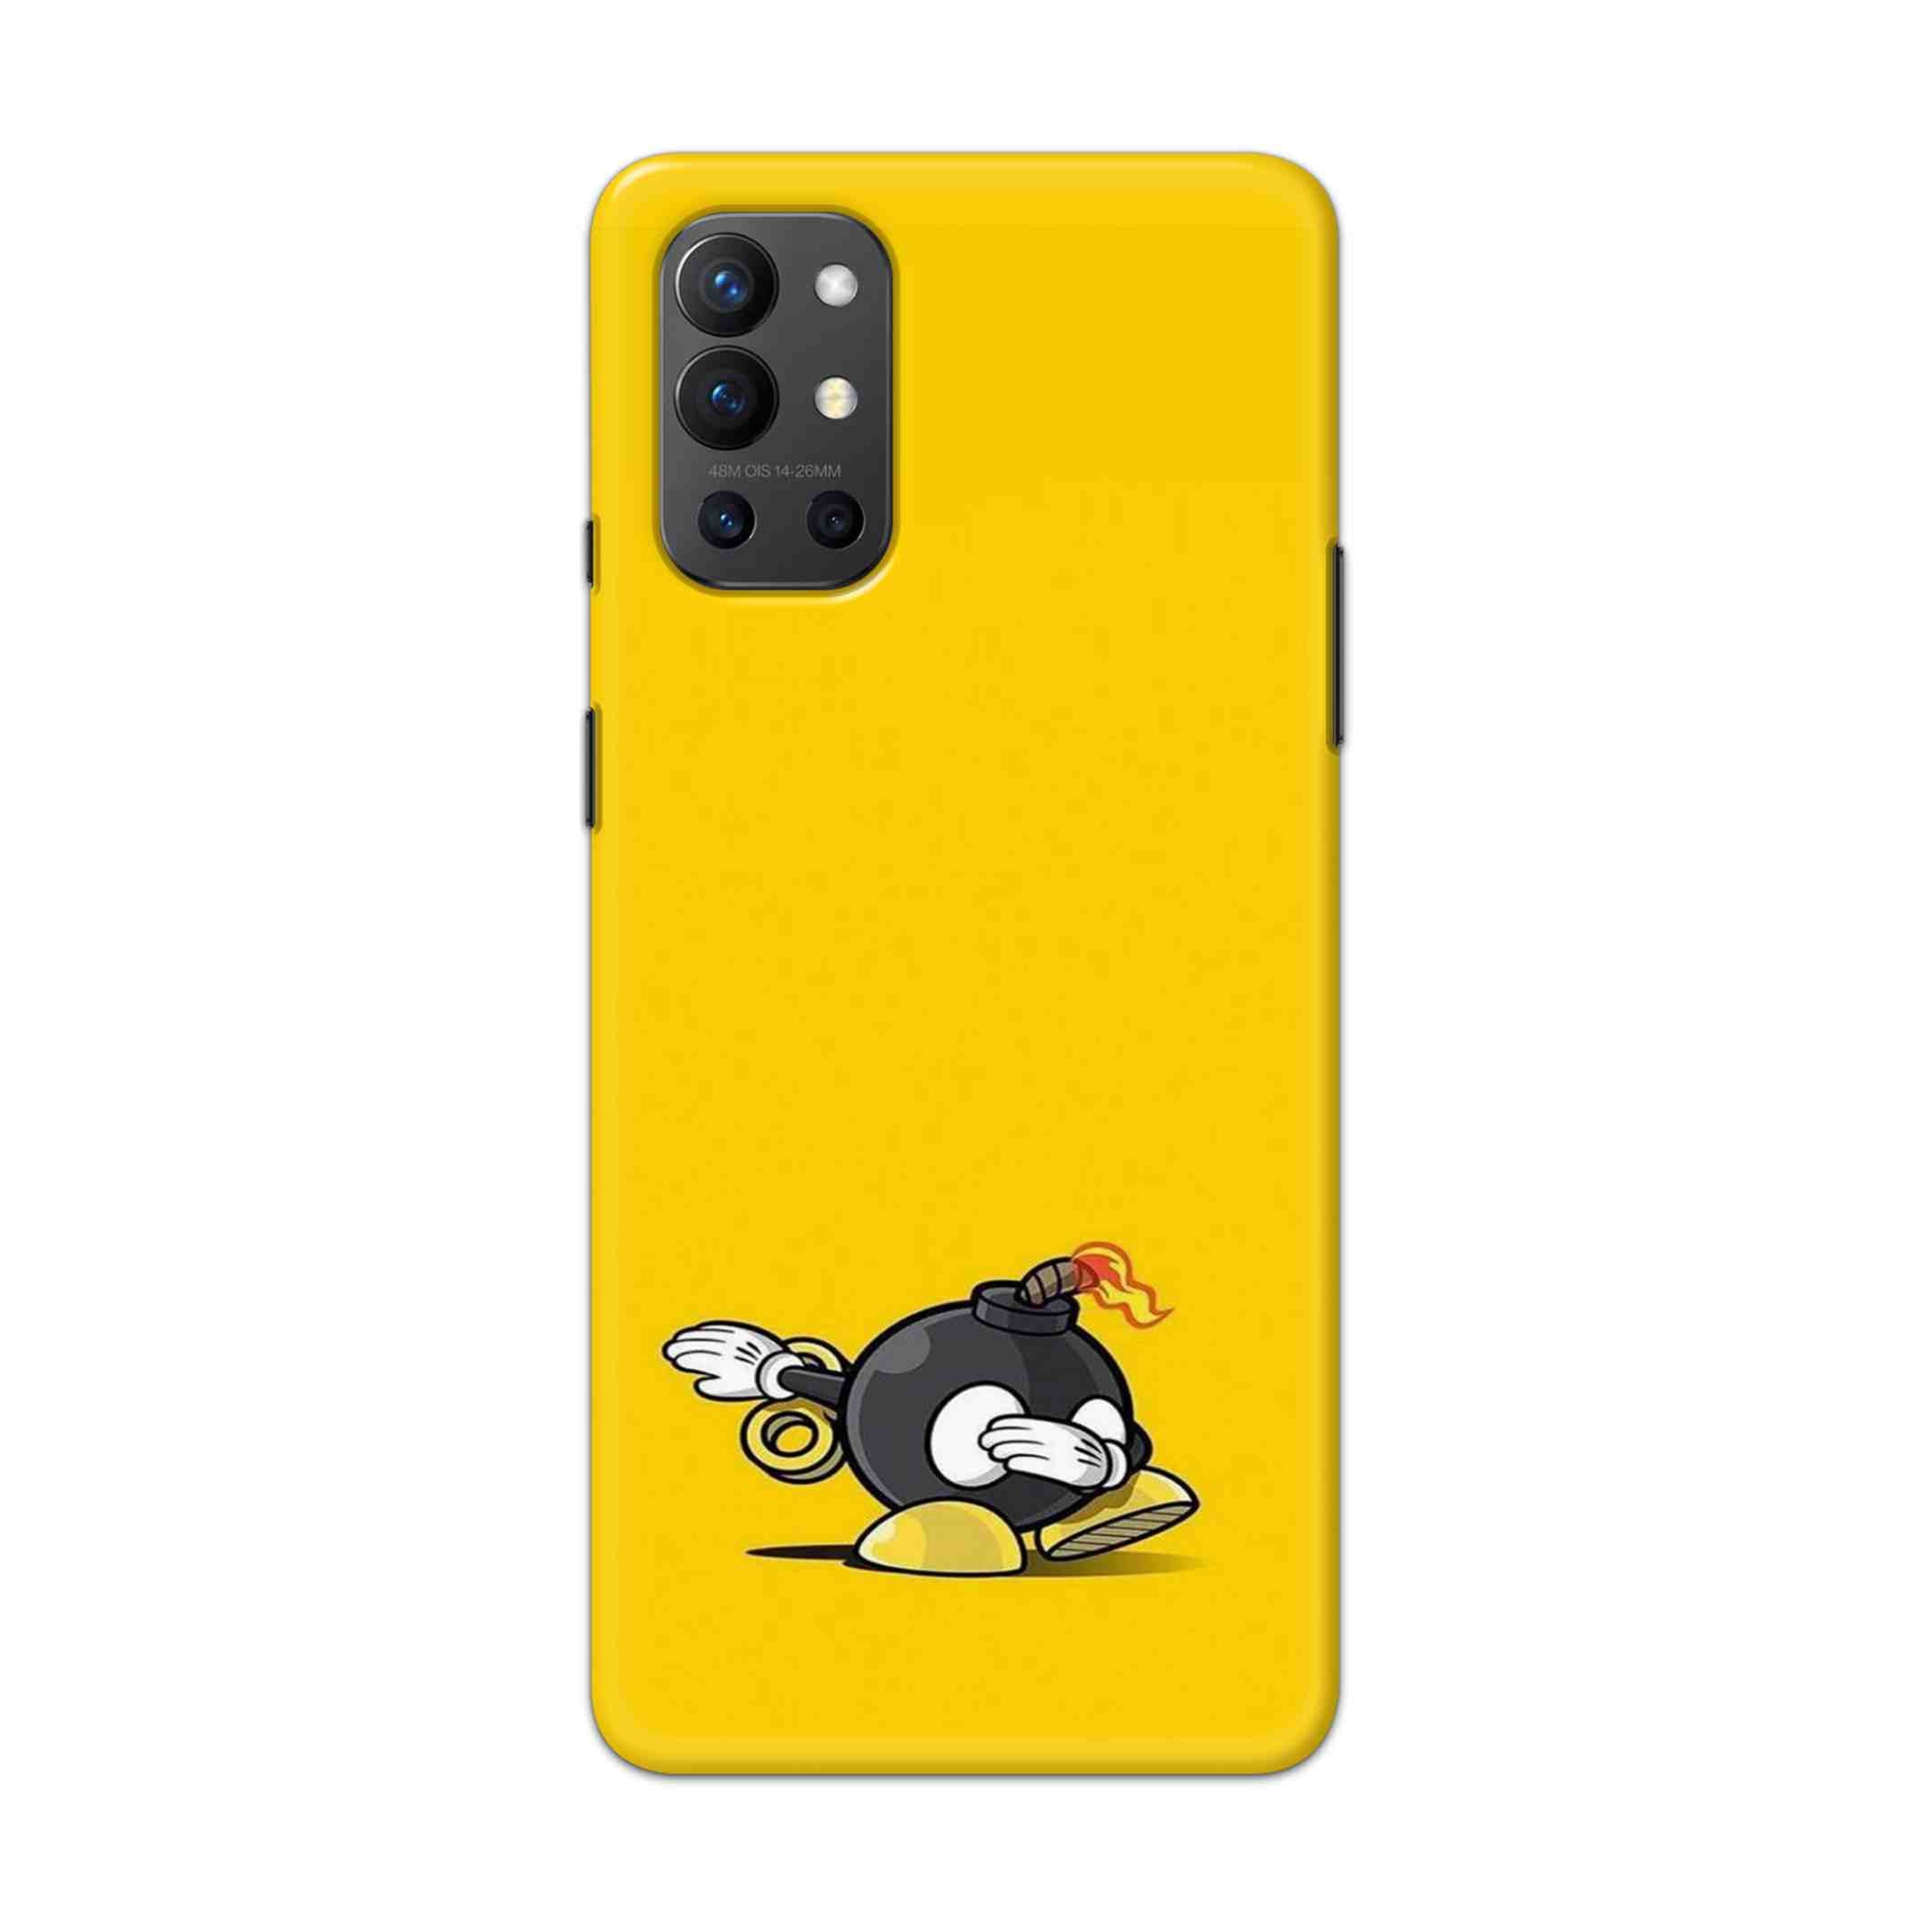 Buy Dashing Bomb Hard Back Mobile Phone Case Cover For OnePlus 9R / 8T Online